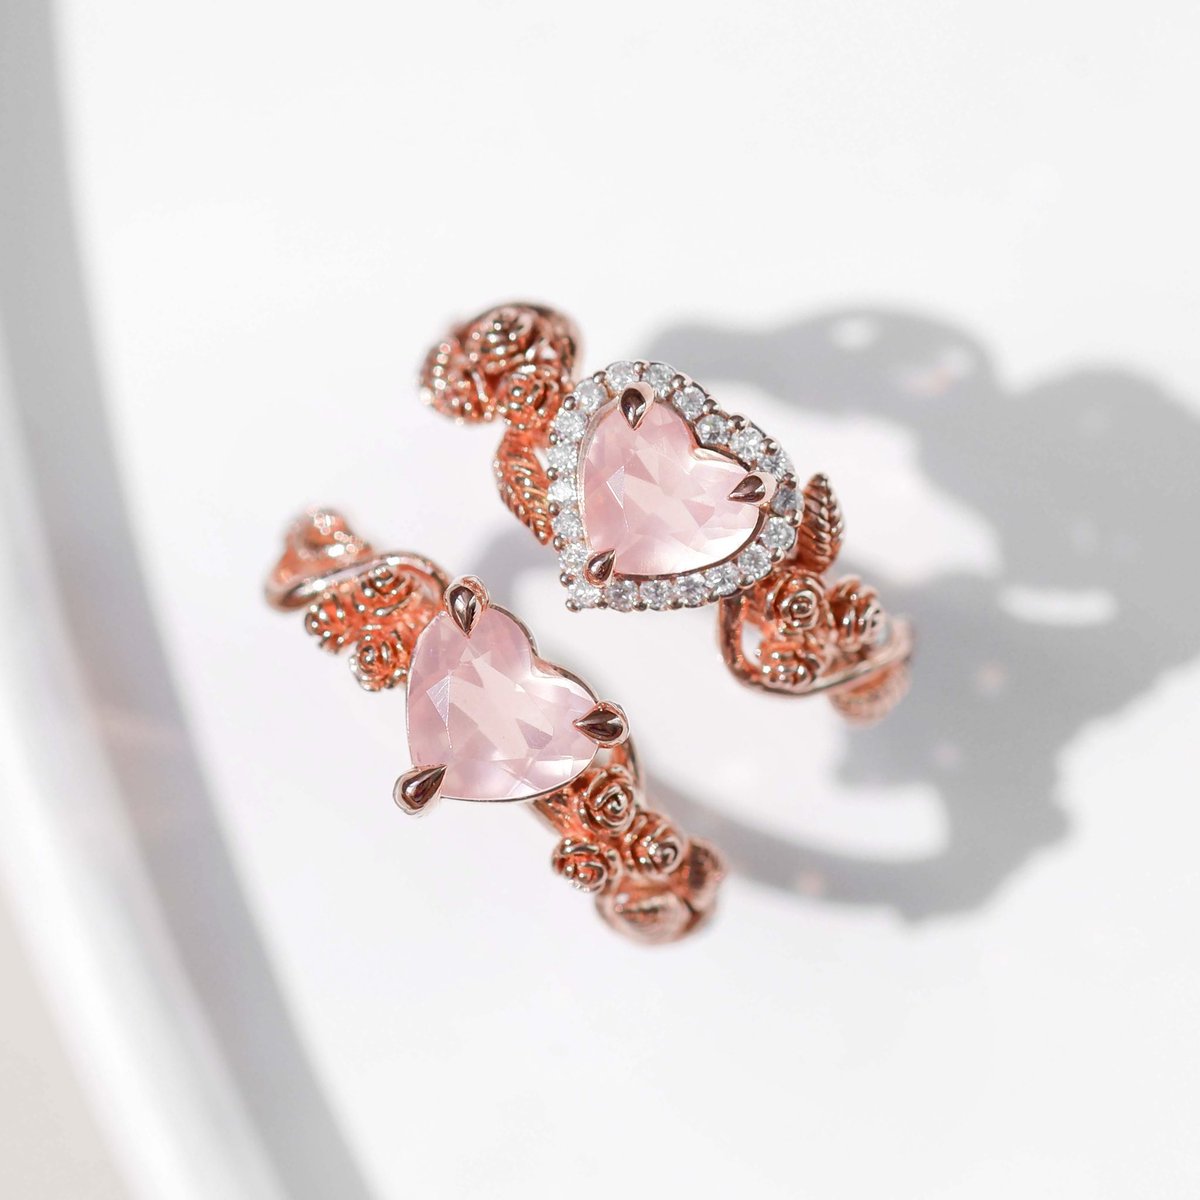 Unique Heart Engagement Ring with Rose quartz is known as the stone of unconditional love.💖

#branchring #rosequartz #rosequartzjewelry #rosequartzring #roseforher #flowerring #roseflowers #roseflowerring #rosering #rosegoldjewelry #rosegoldring #heartjewelry #heartring